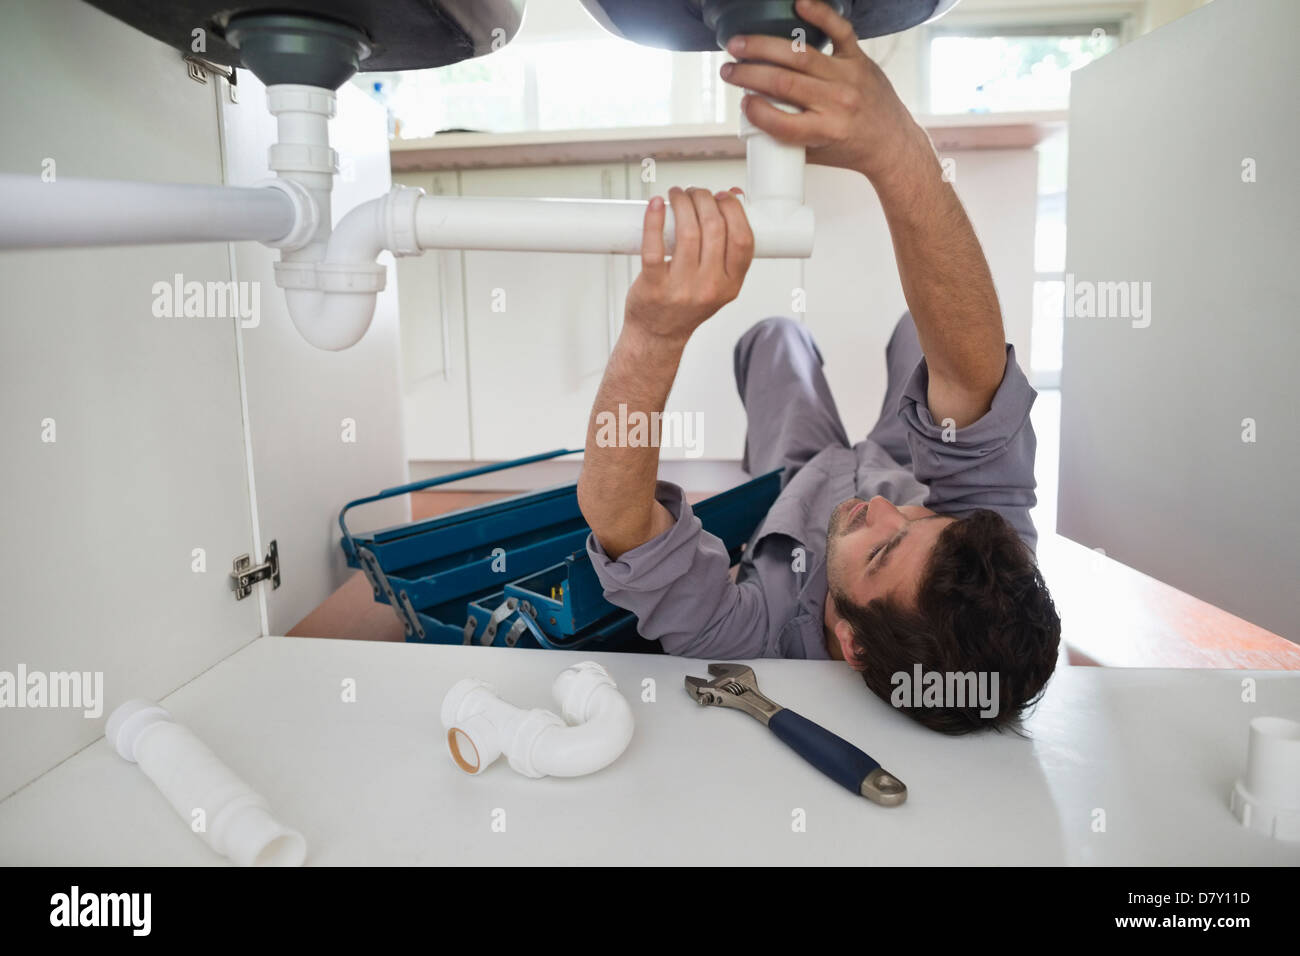 Plumber Working On Pipes Under Kitchen Sink Stock Photo